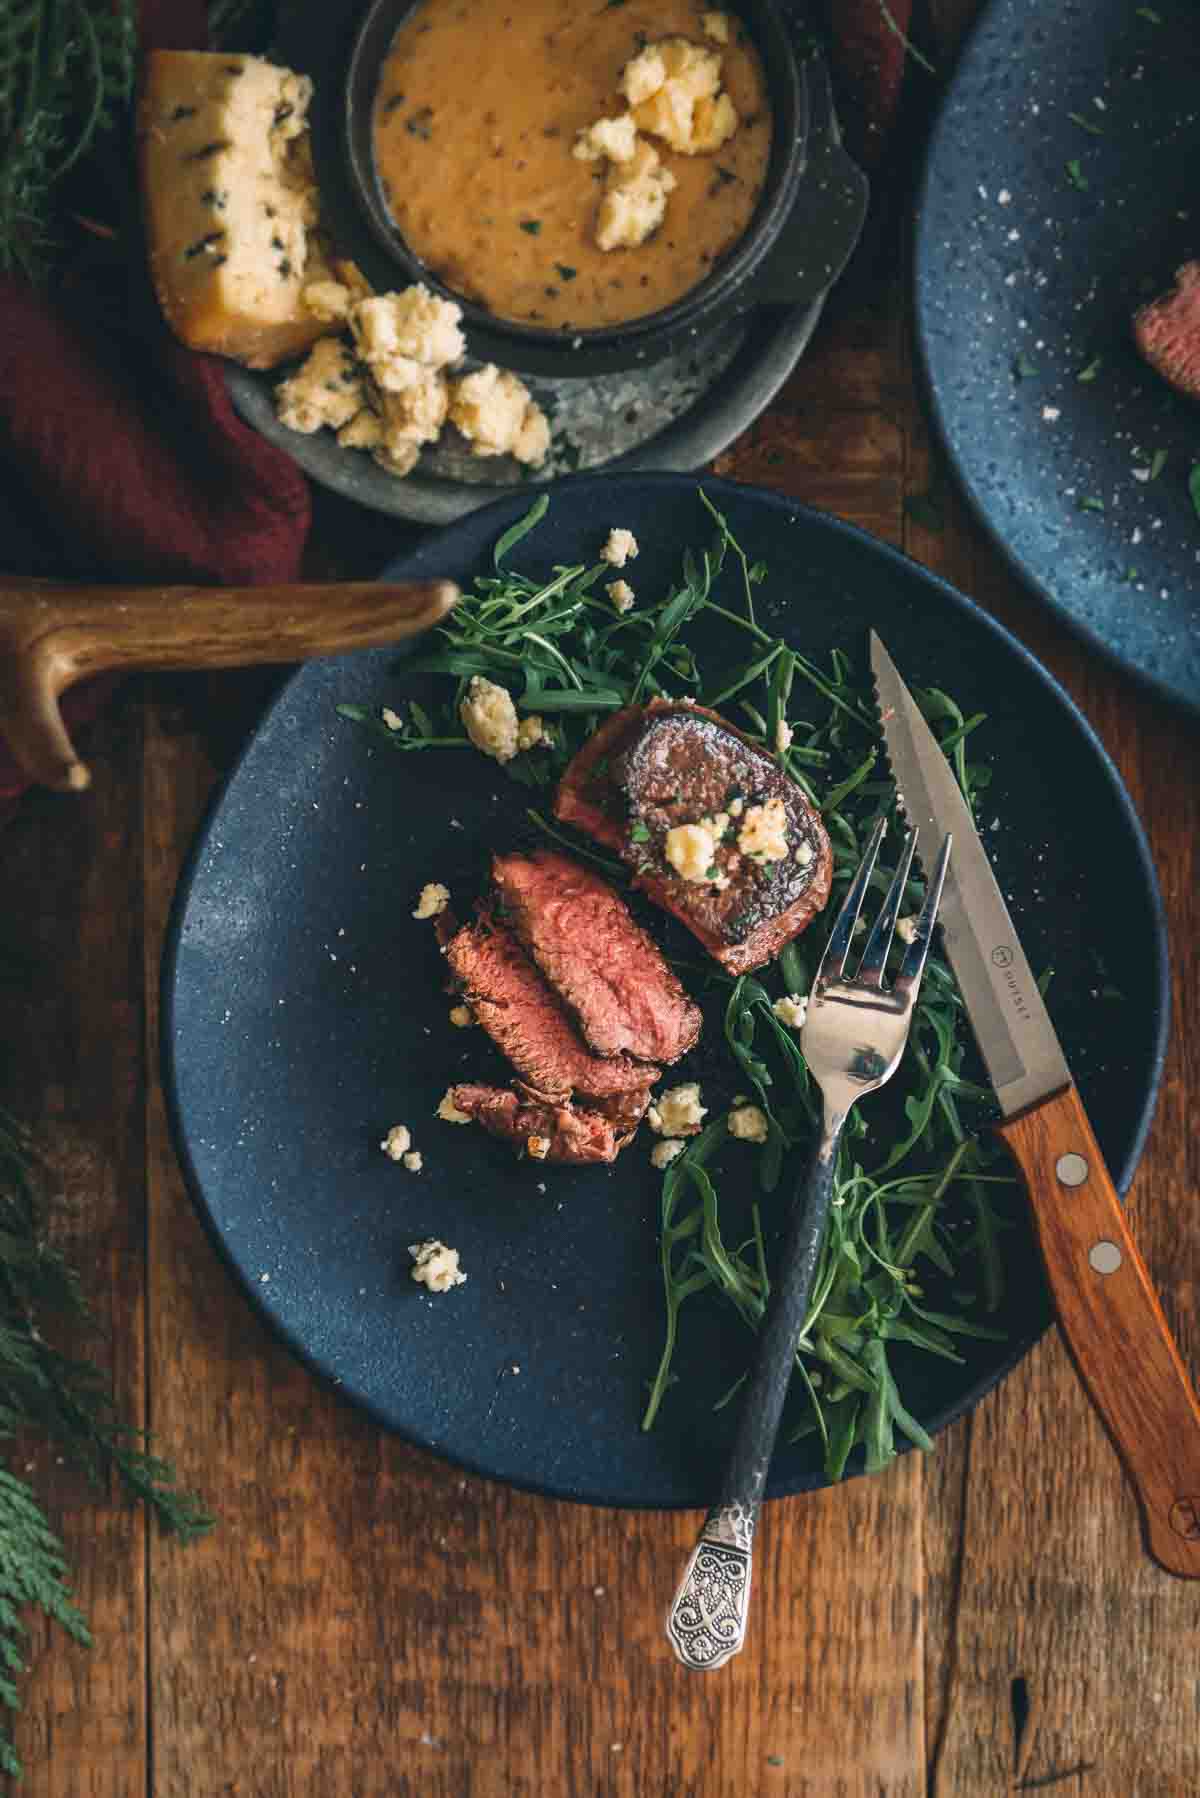 A pan seared sous vide cooked filet mignon sliced to serve on a black plate with baby arugula and gorgonzola. 